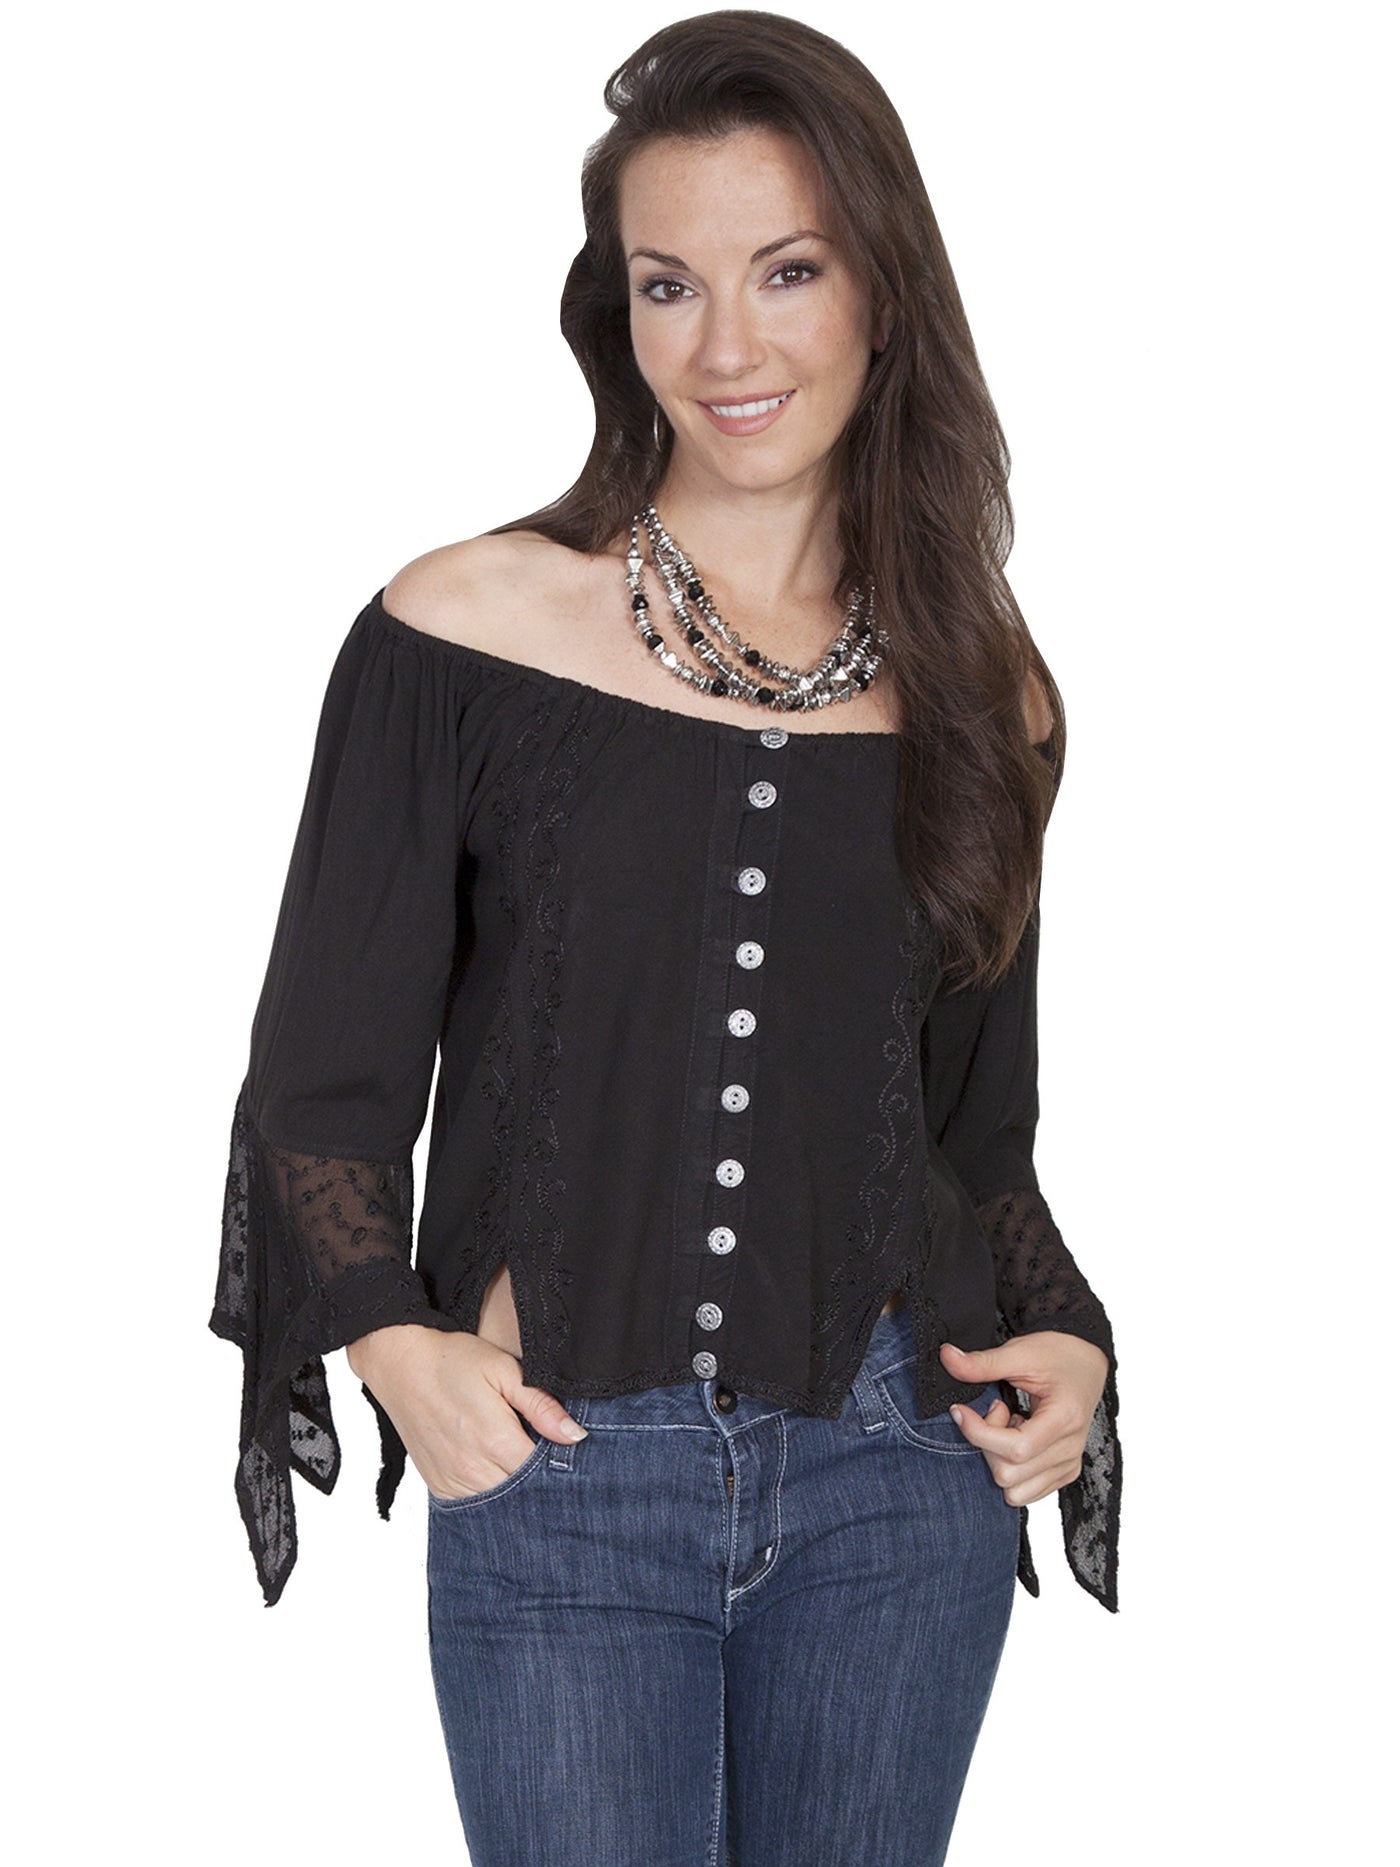 Saloon Off Shoulder Button Up Blouse in Black - SOLD OUT